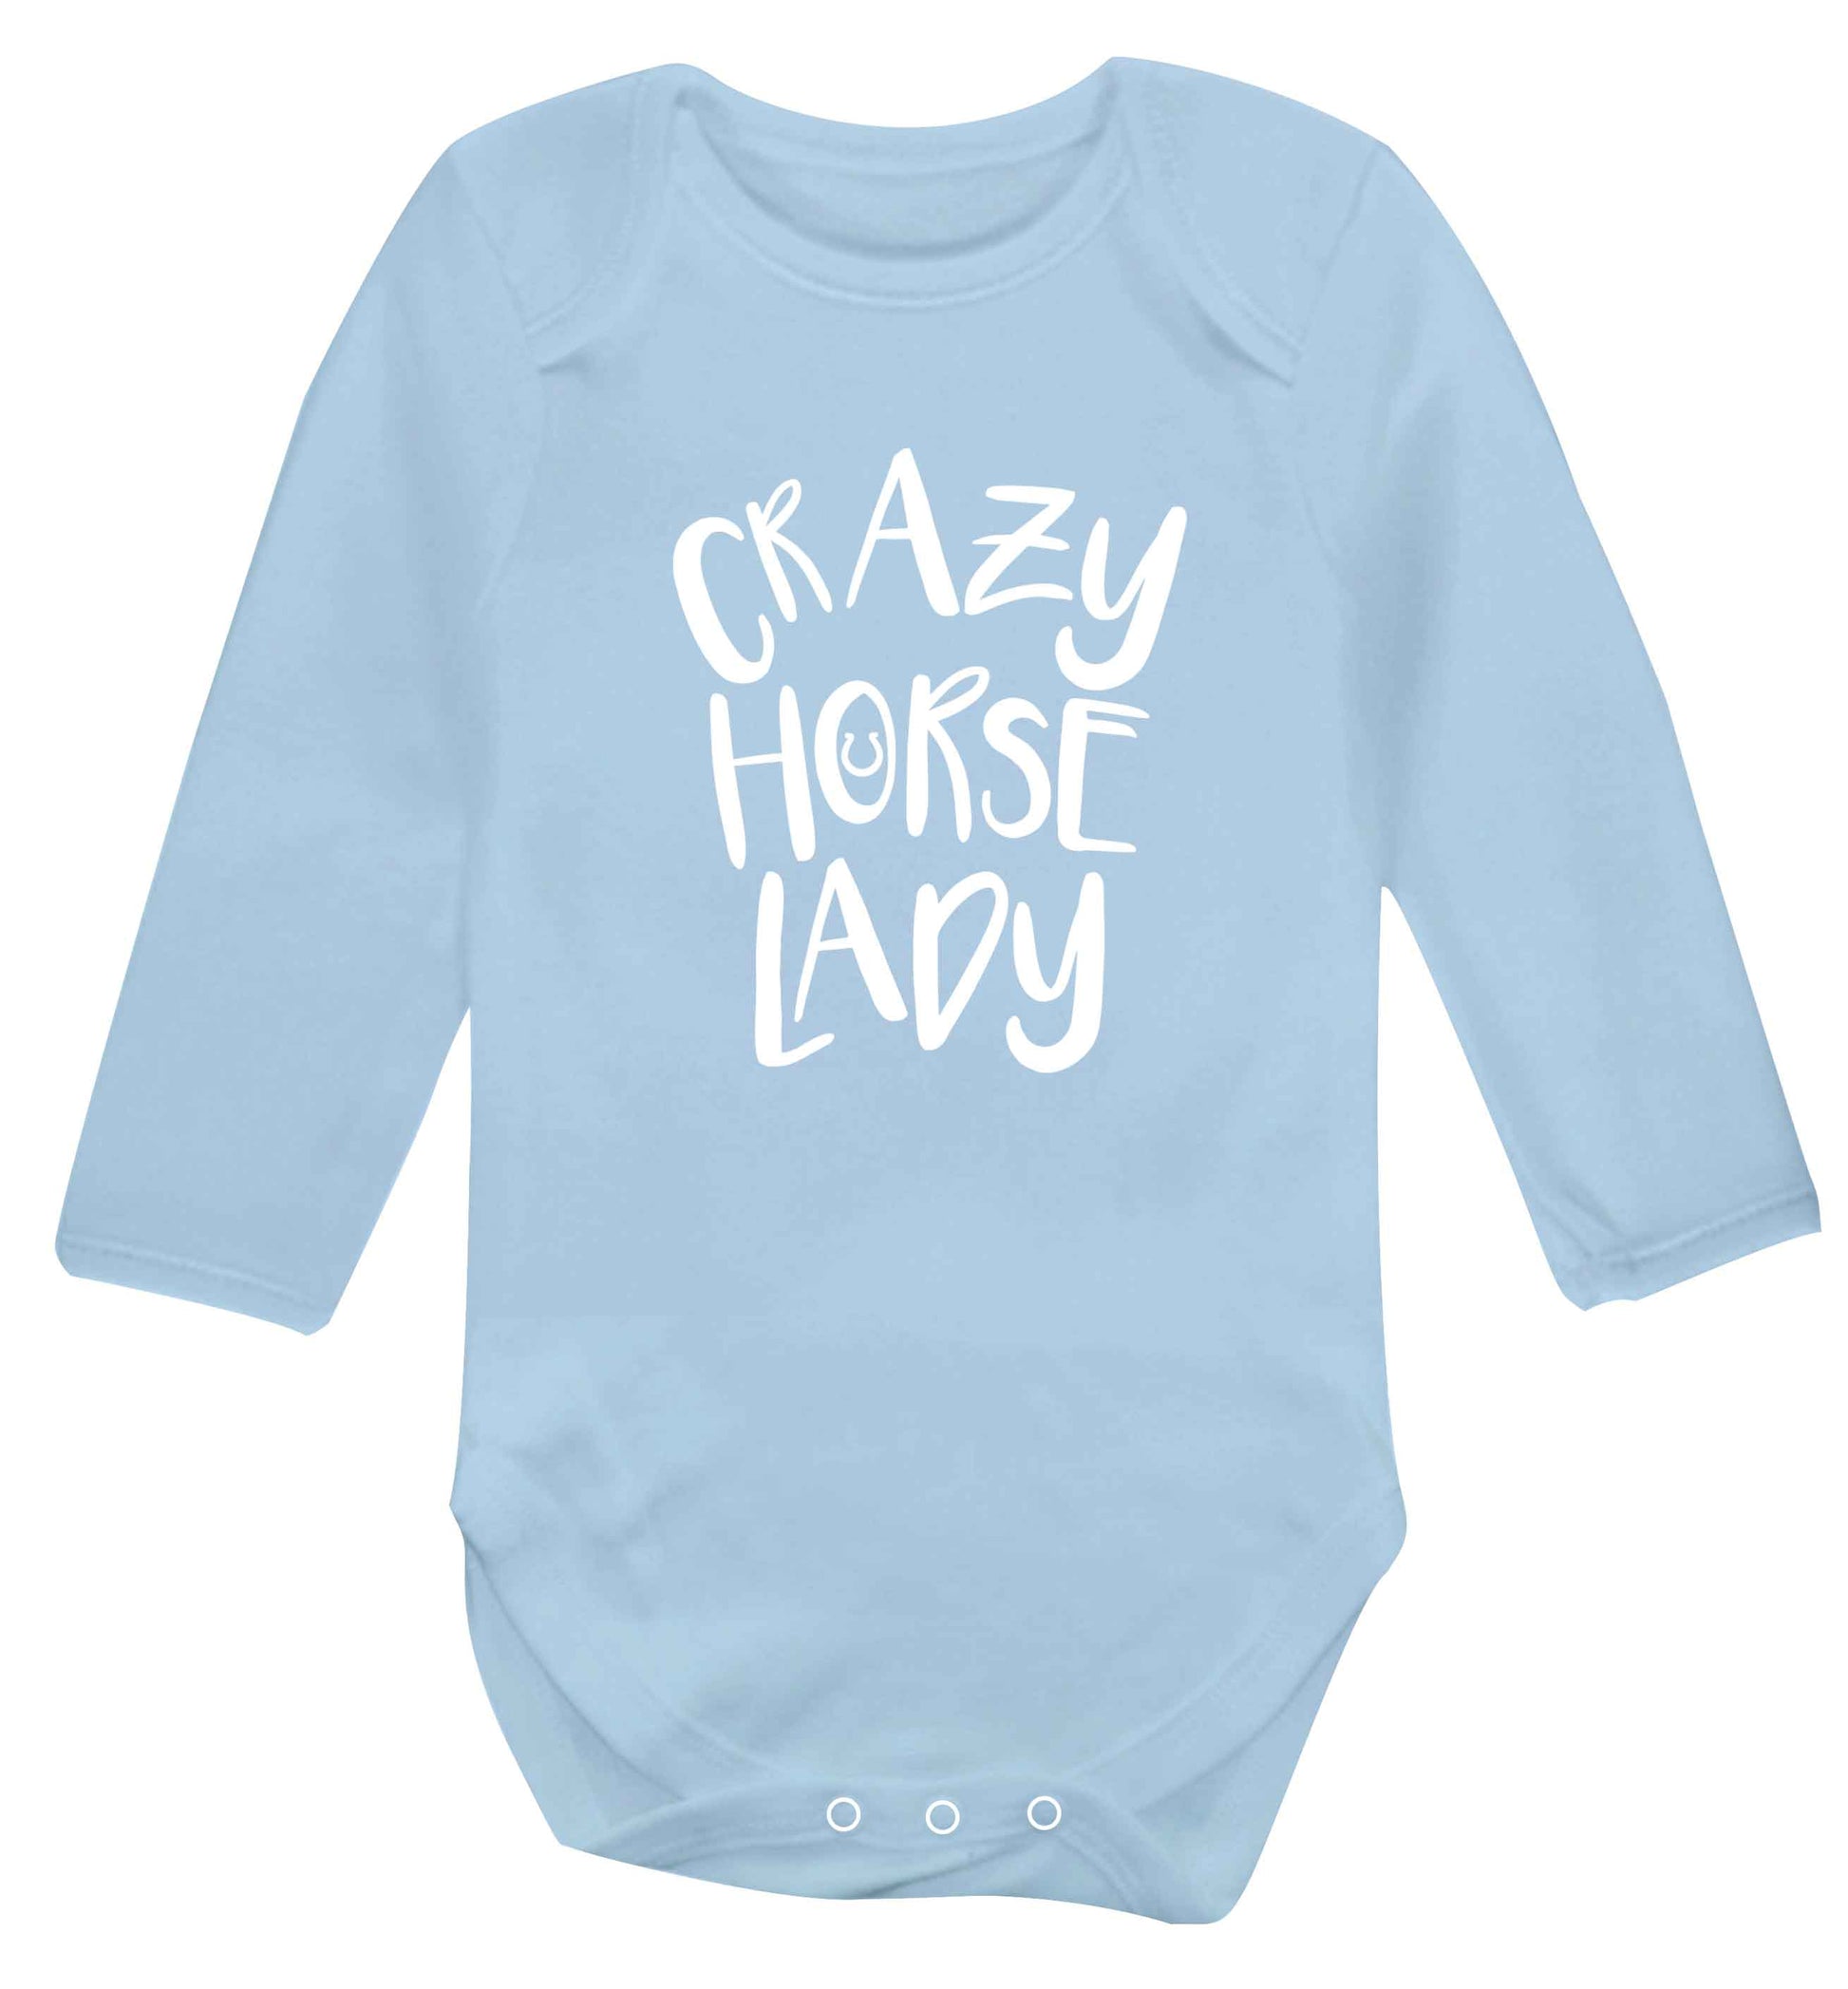 Crazy horse lady baby vest long sleeved pale blue 6-12 months